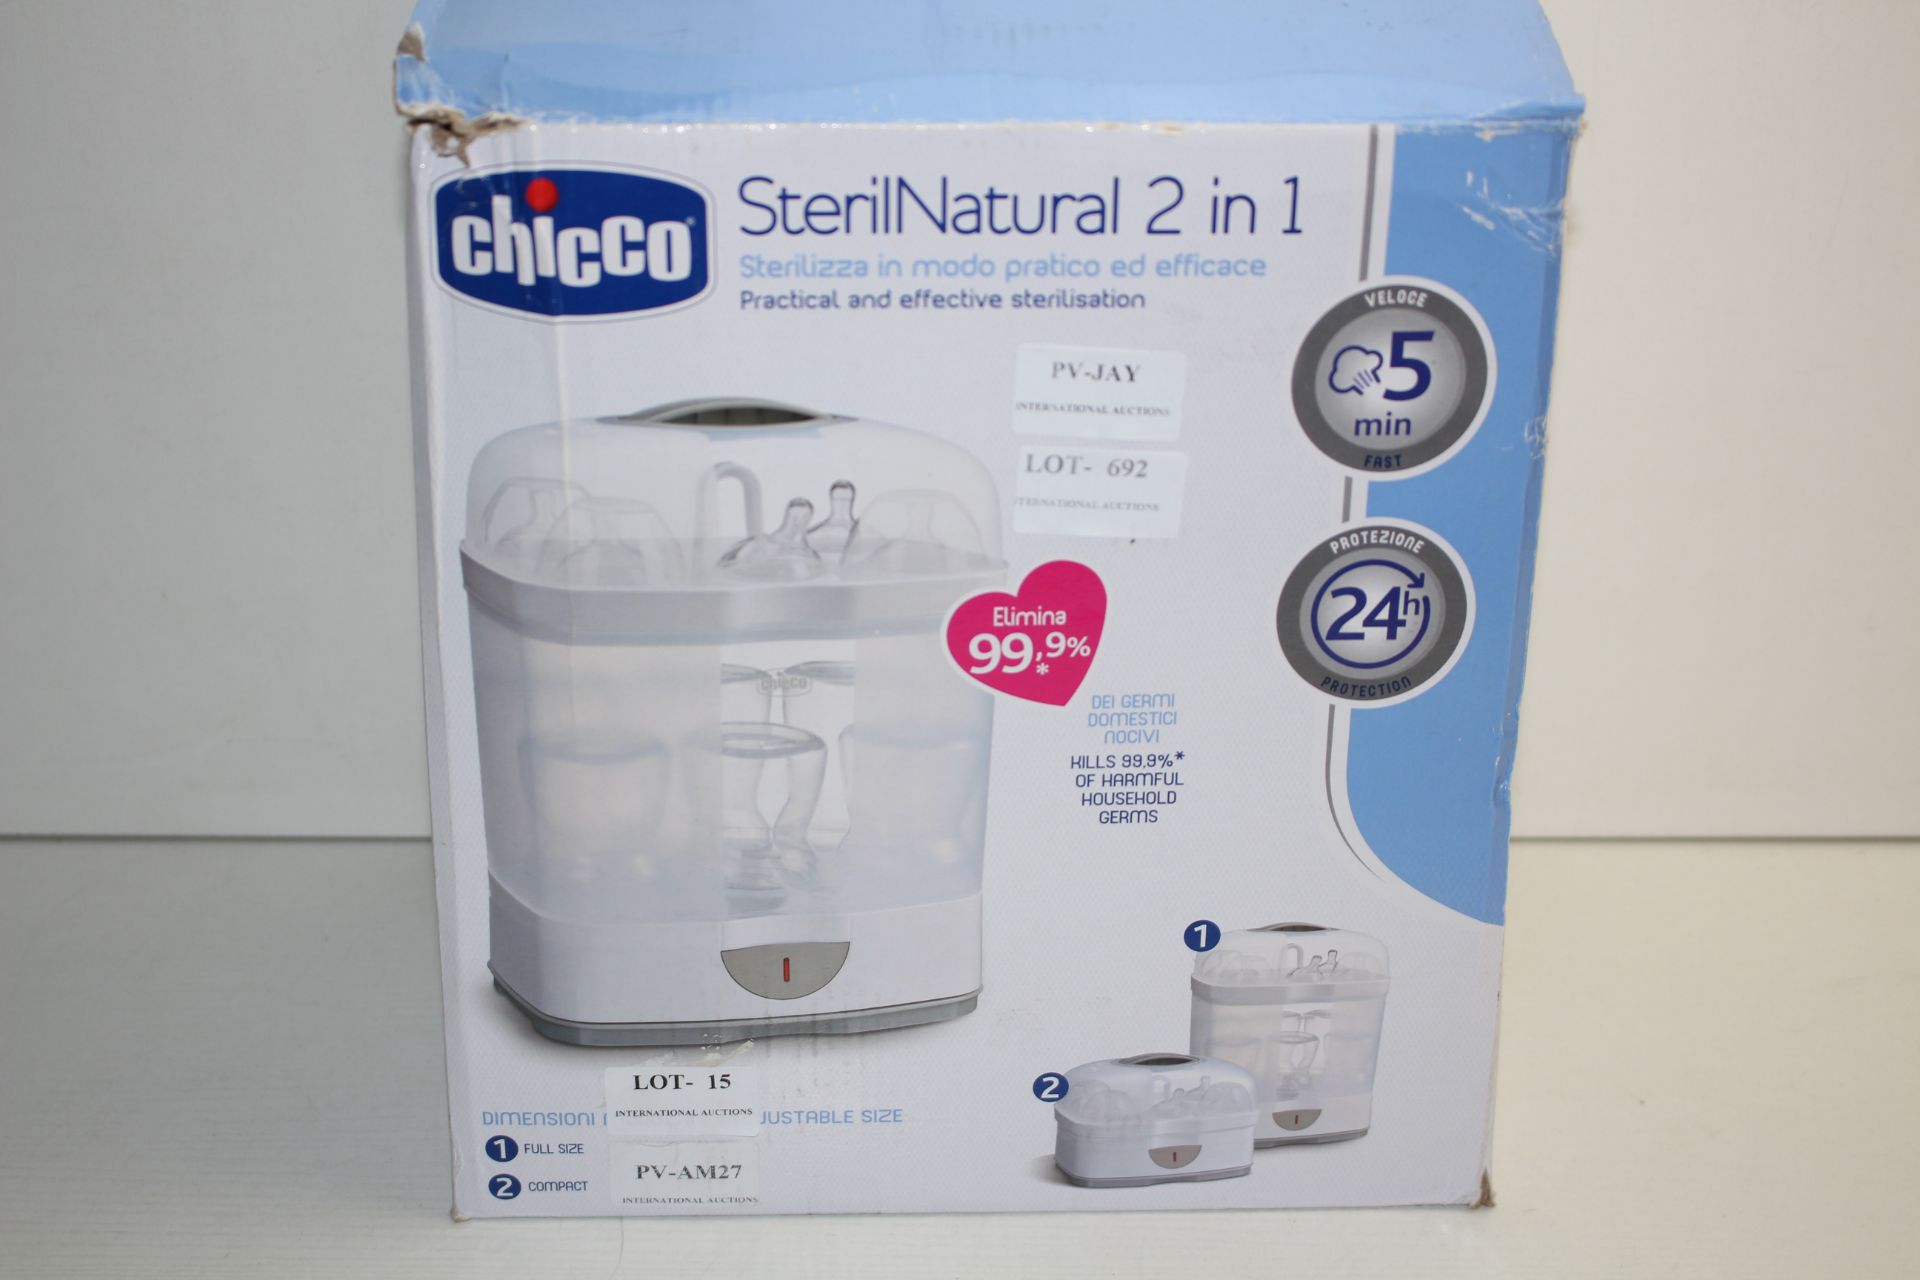 BOXED CHICO STERILNATURAL 2-IN-1 Condition ReportAppraisal Available on Request- All Items are